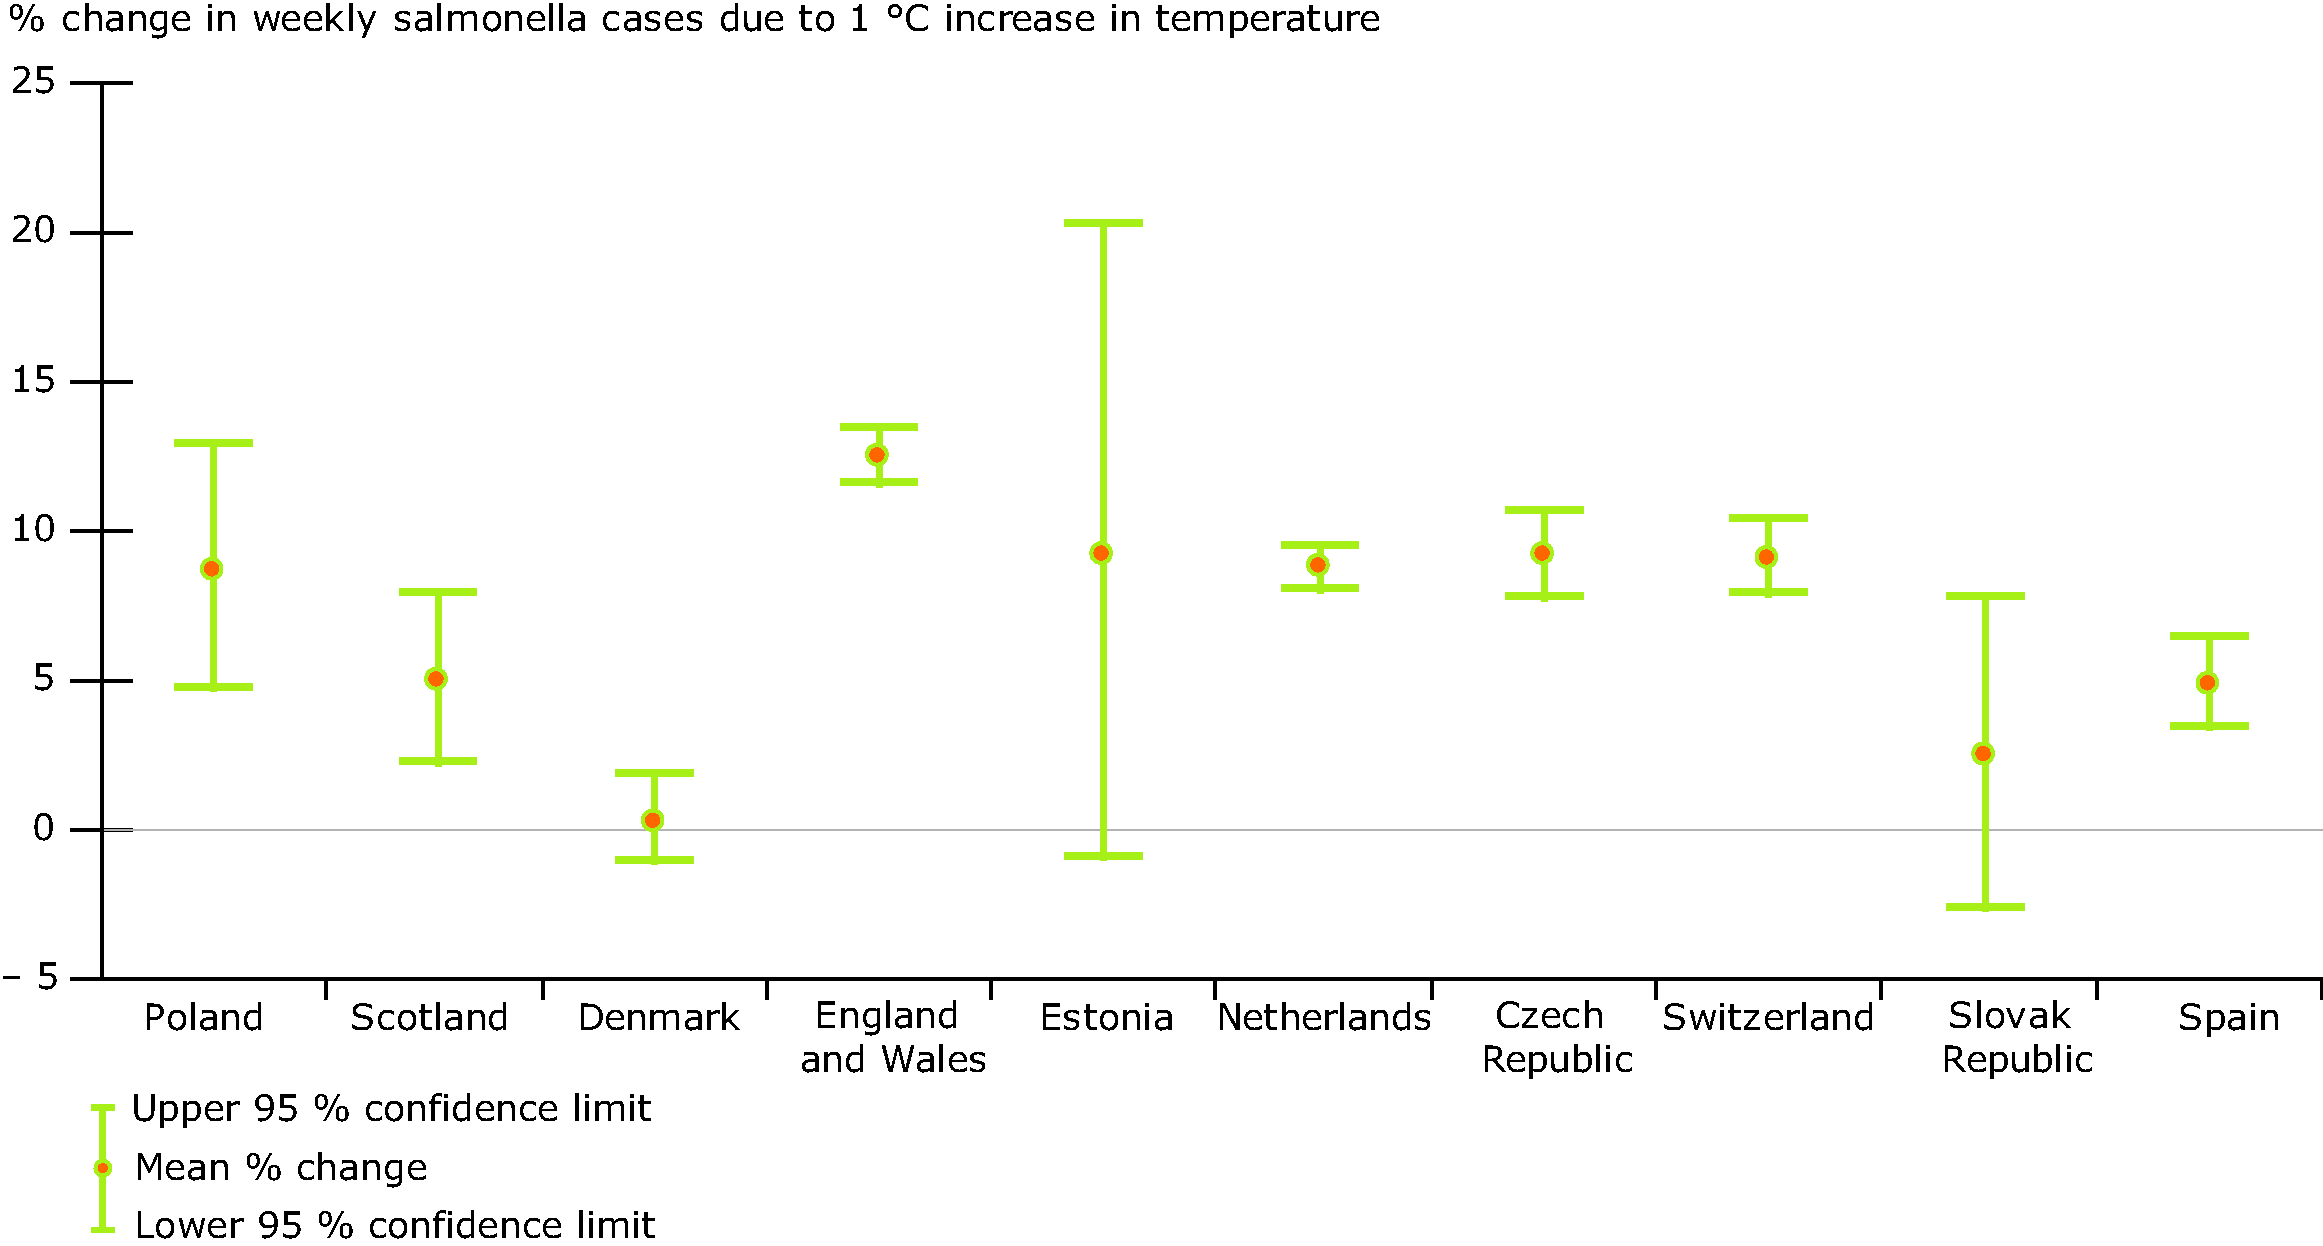 Percentage change of weekly salmonella cases by 1 oC temperature increase